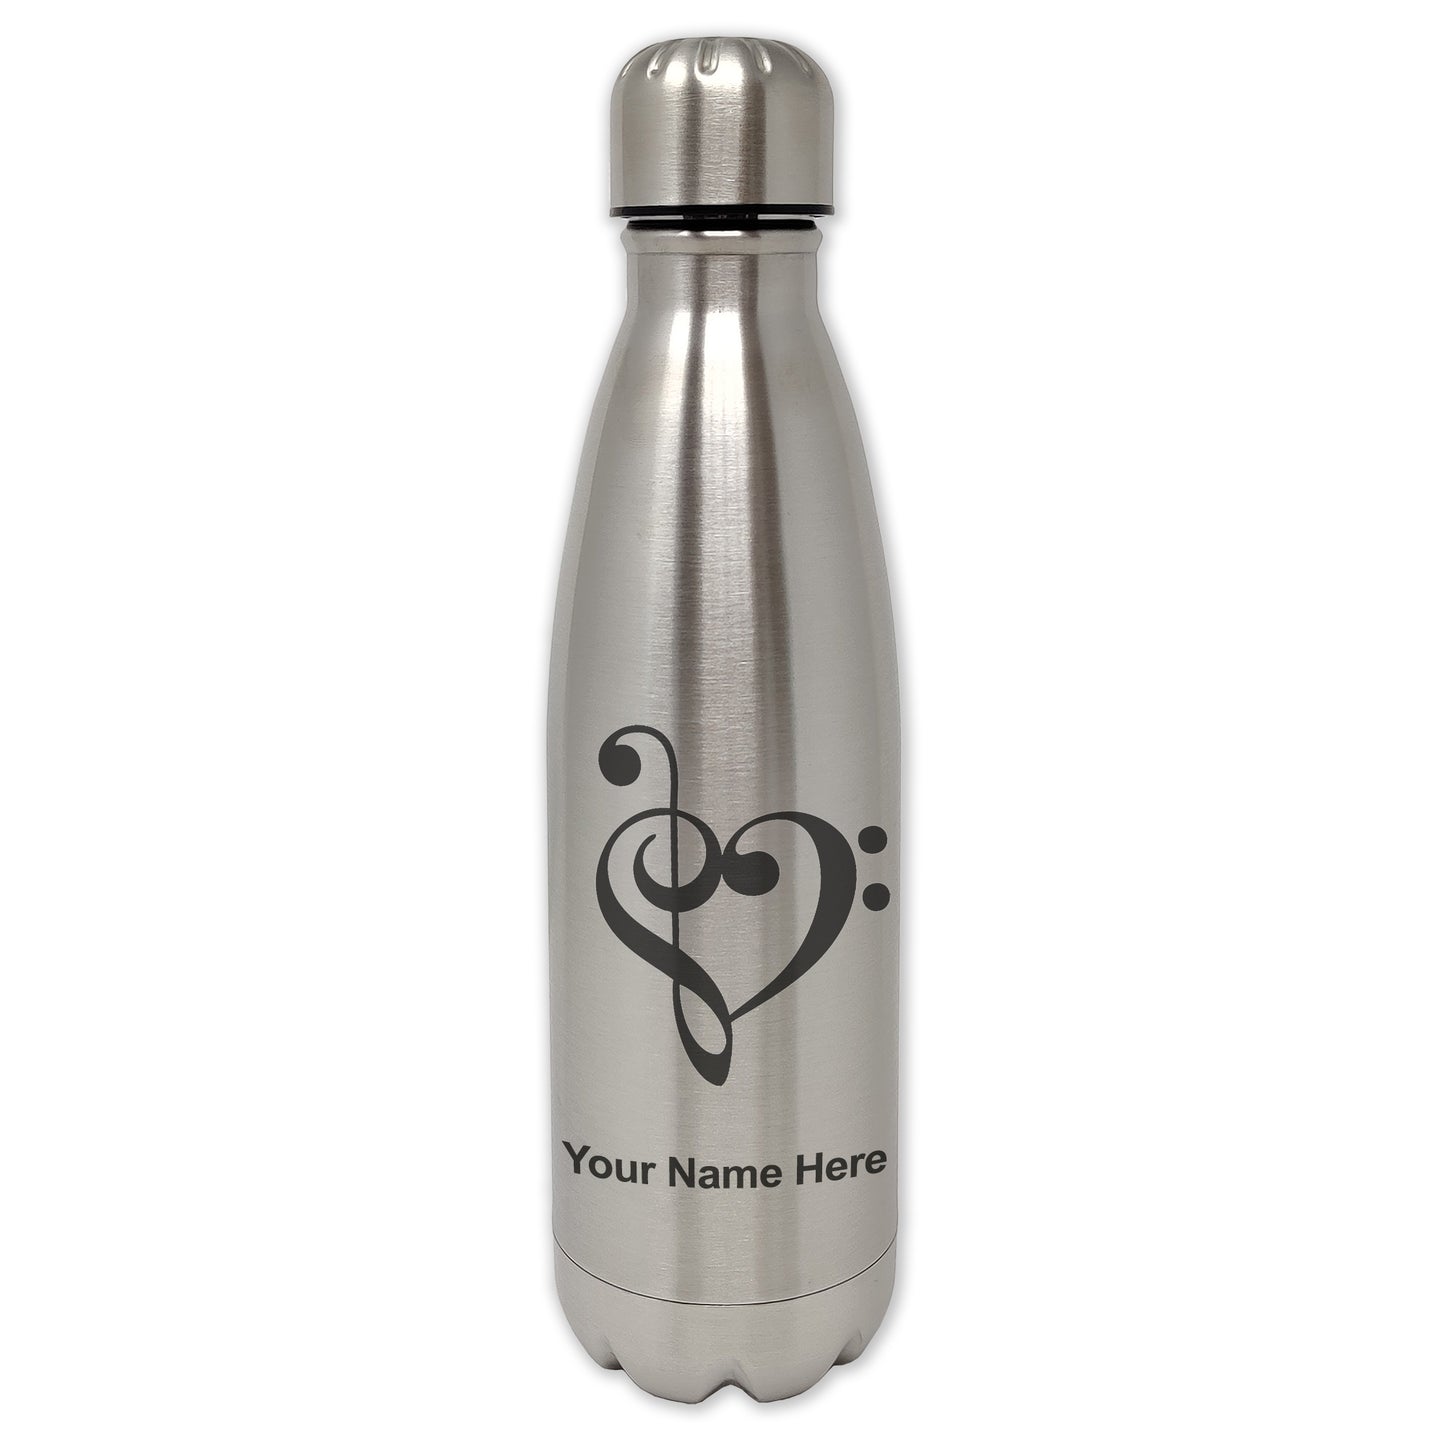 LaserGram Single Wall Water Bottle, Music Heart, Personalized Engraving Included